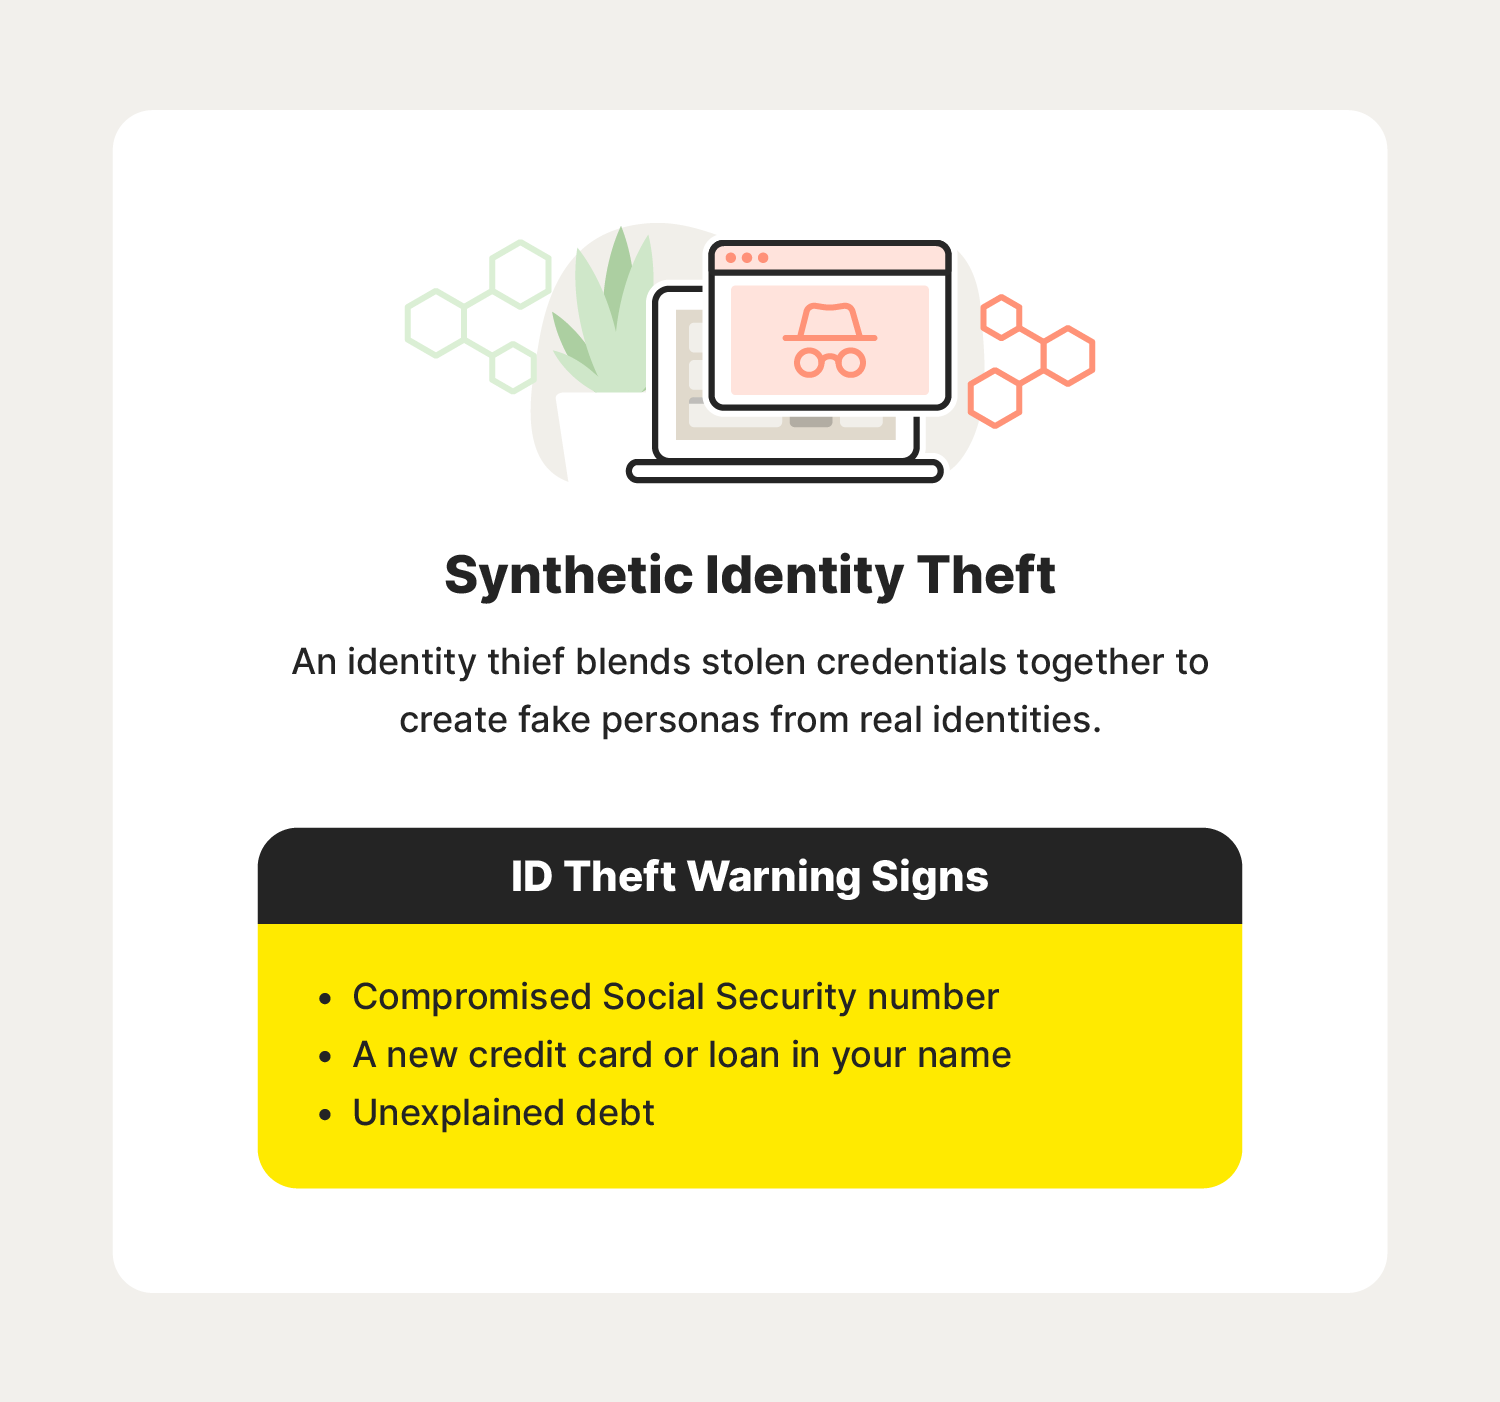 A graphic describes synthetic identity theft, a type of identity theft to keep an eye on when learning how to avoid identity theft.